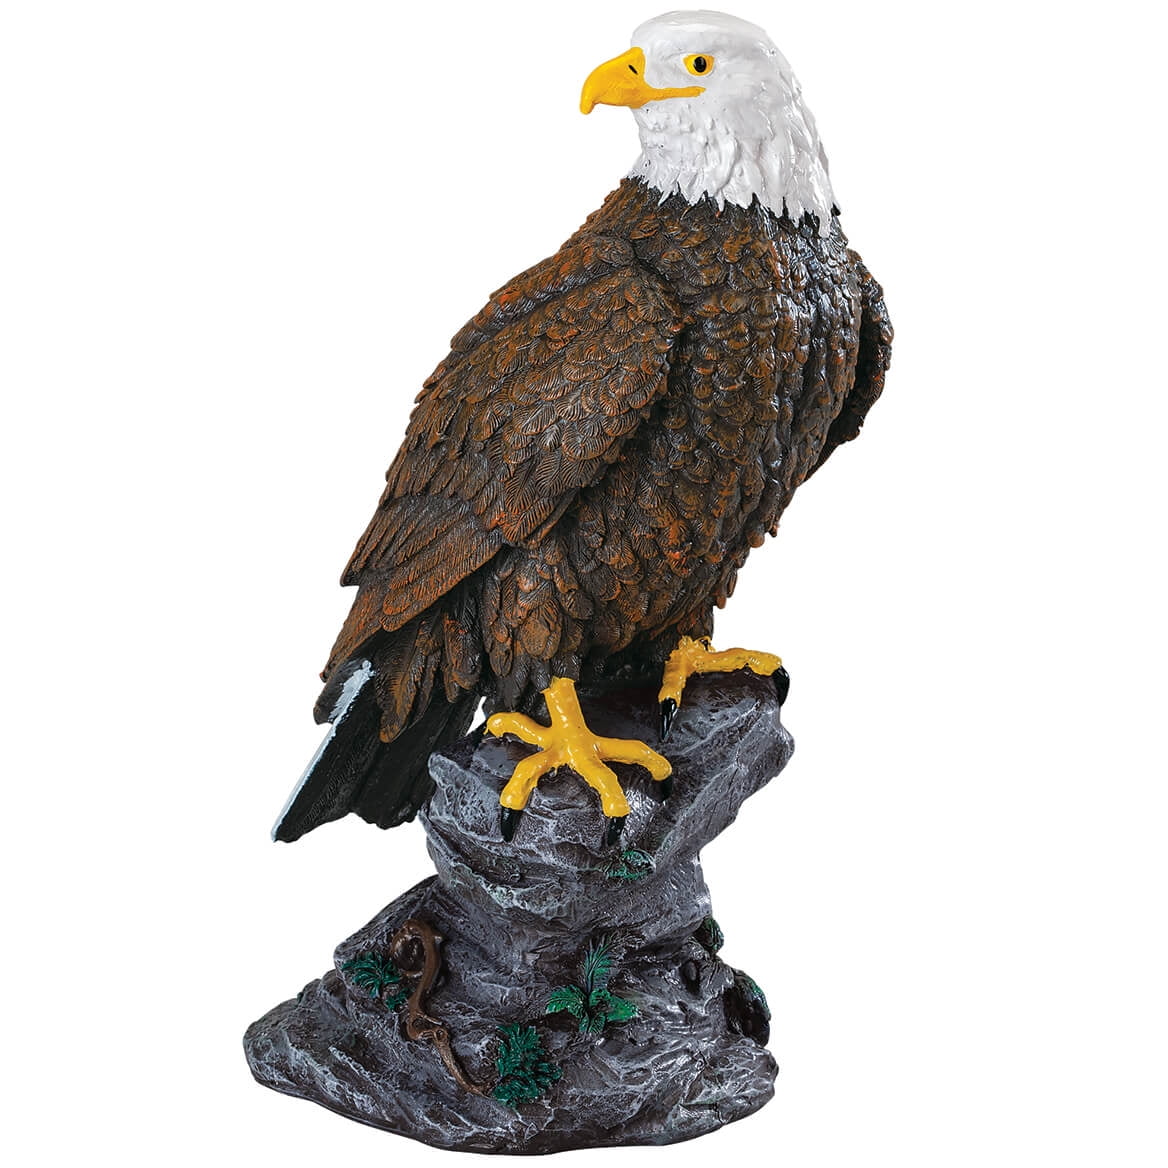 12 StealStreet SS-G-54153 Bald Eagle Head & Bust Statue with Feather on Wood Base